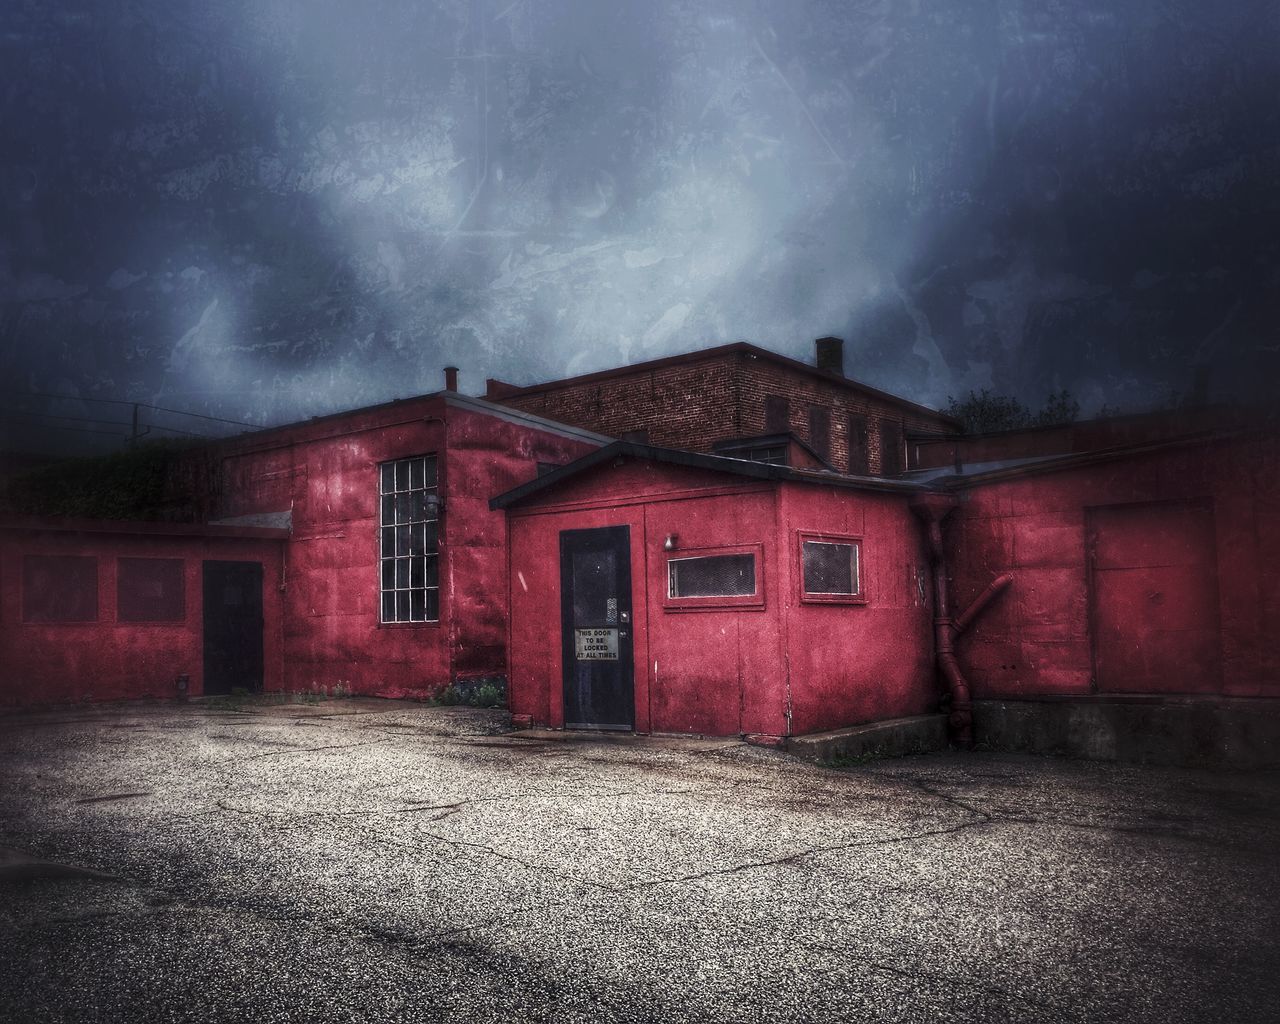 architecture, building exterior, built structure, sky, red, cloud - sky, house, night, street, cloudy, dusk, residential structure, weather, road, outdoors, illuminated, window, overcast, no people, residential building